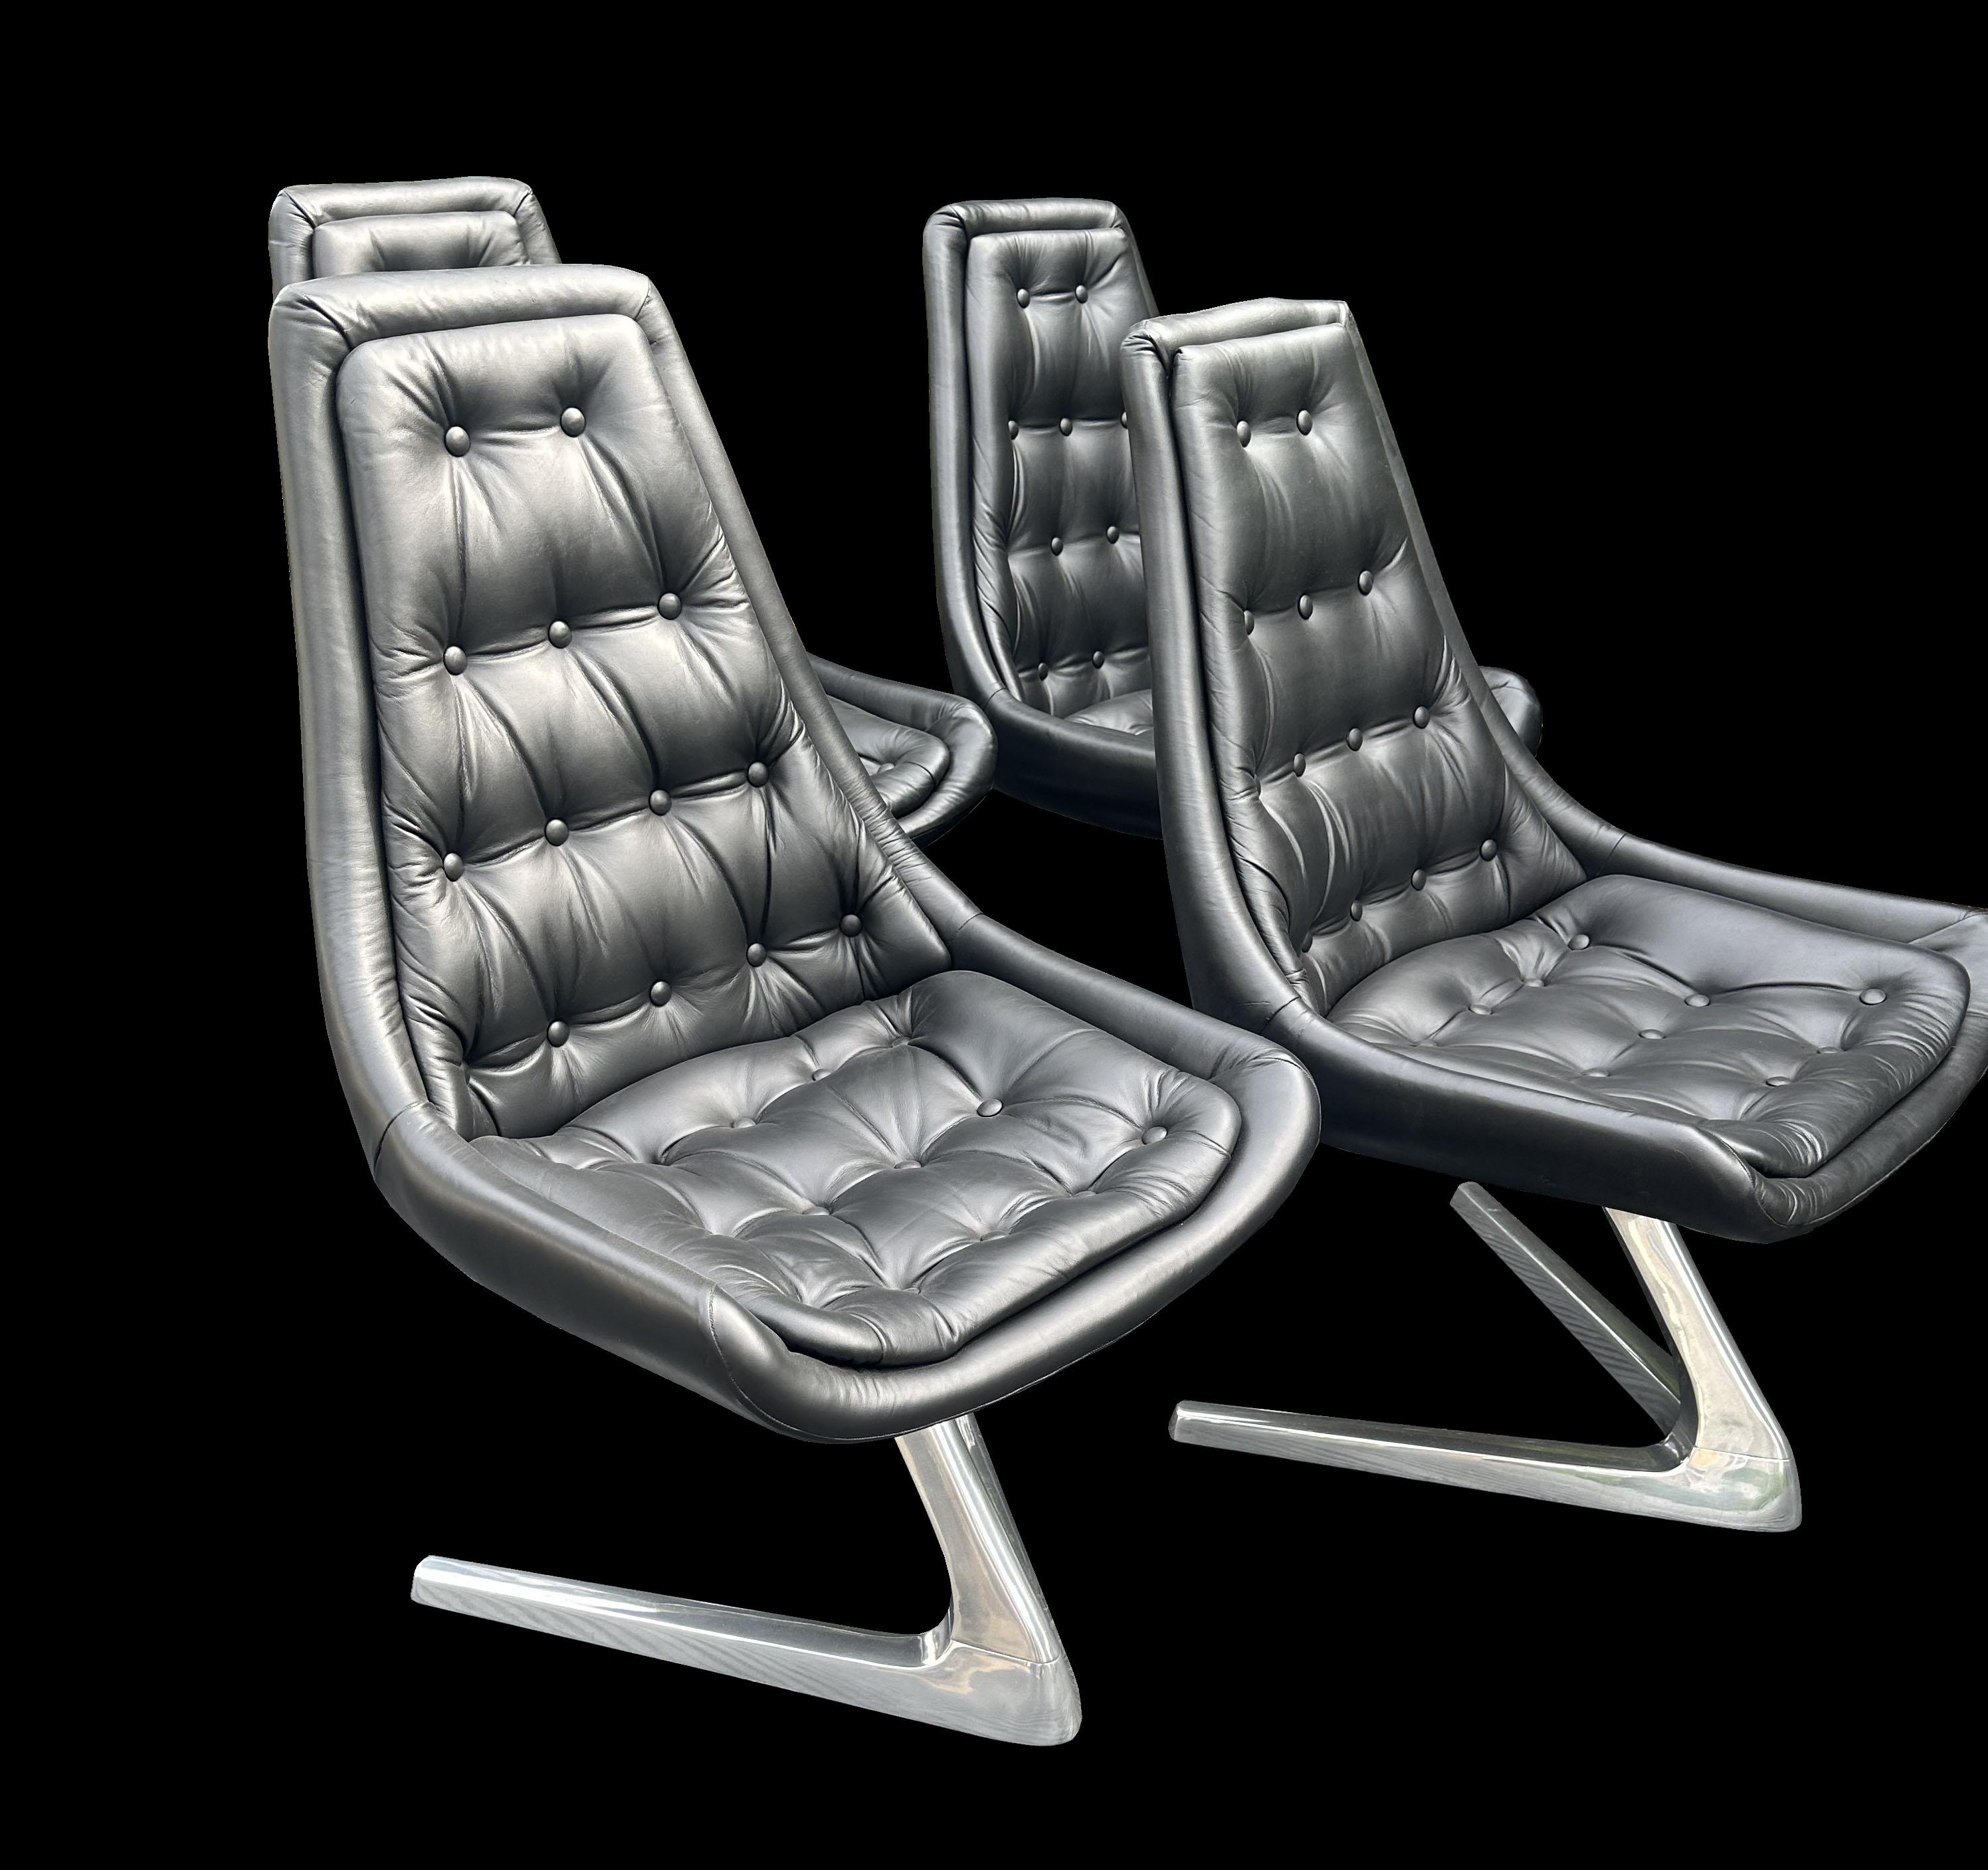 An original set of 4 Chromcraft Sculpta self centering swivel chairs in Black leather and polished aluminium, as seen in the original series of Star-Trek in the episode 'The trouble with Tribbles' (a still shot shown in the images of the